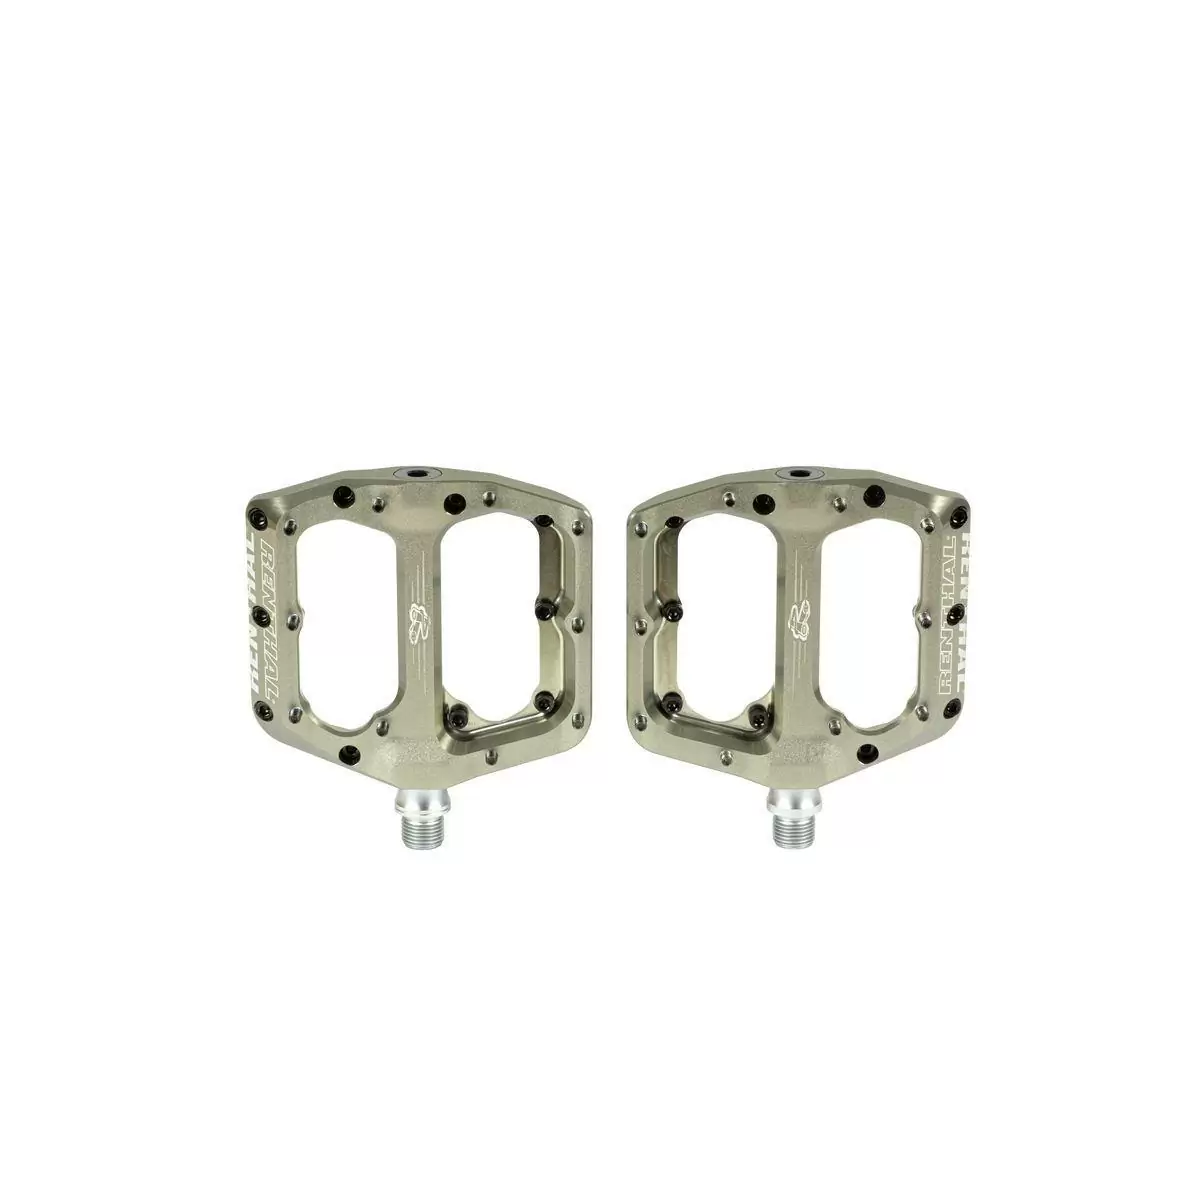 Pair of Revo-F AluGold Flat Pedals - image